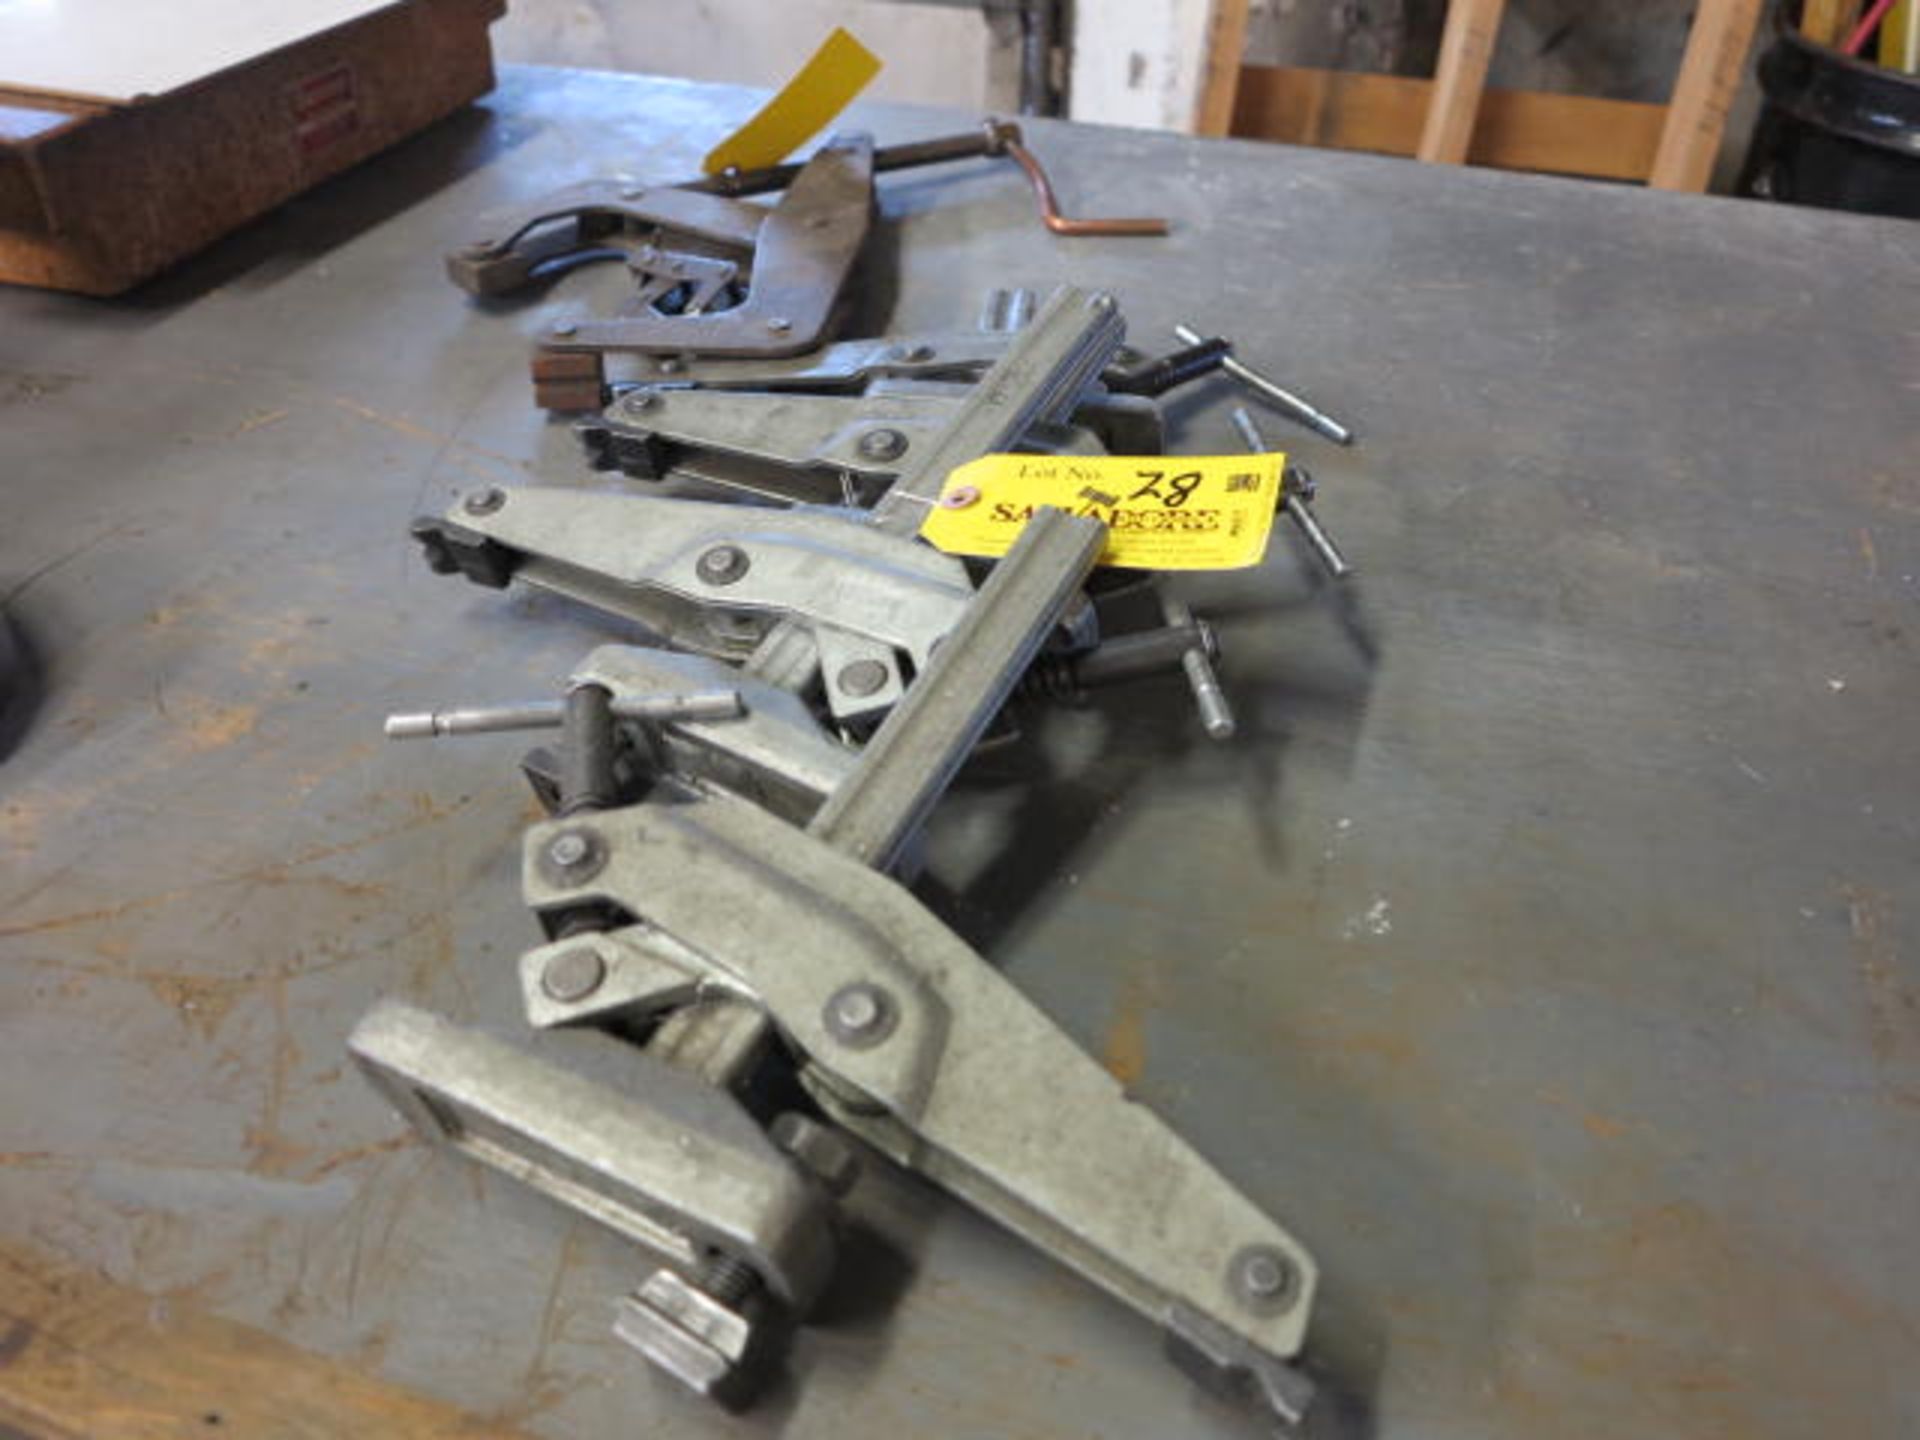 Lot Table Clamps and Twist Clamps Location: Elmco Tool 3 Peter Rd Bristol, RI